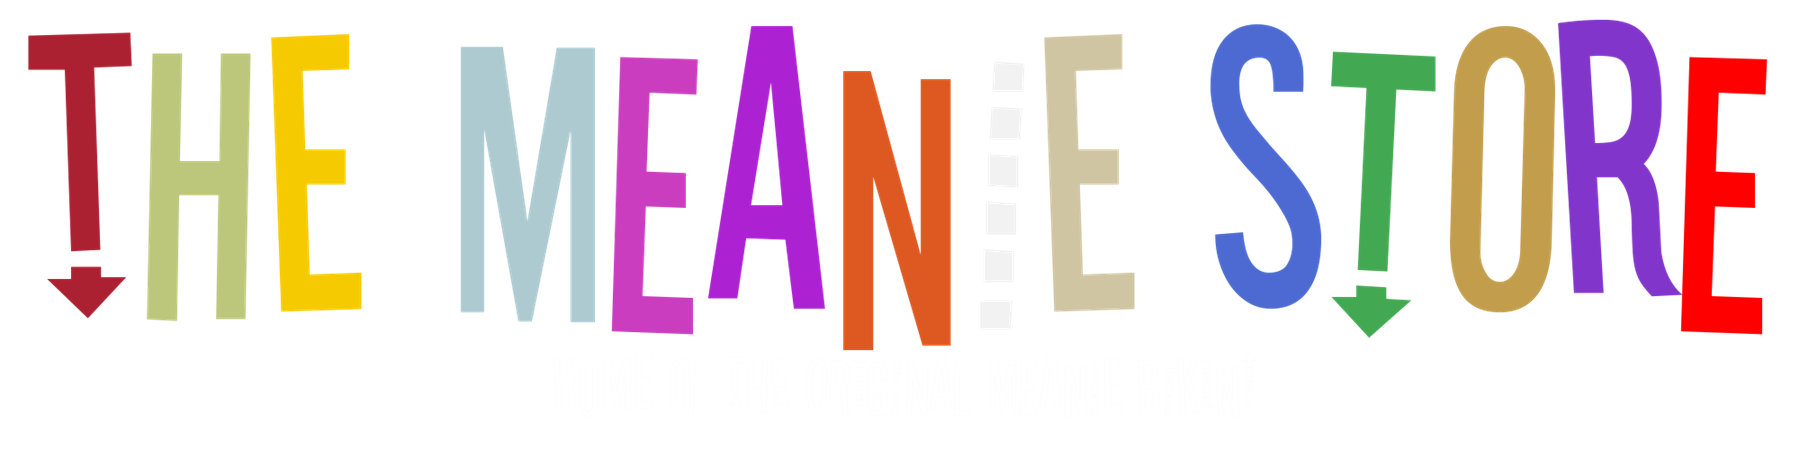 The Meanie Store Banner